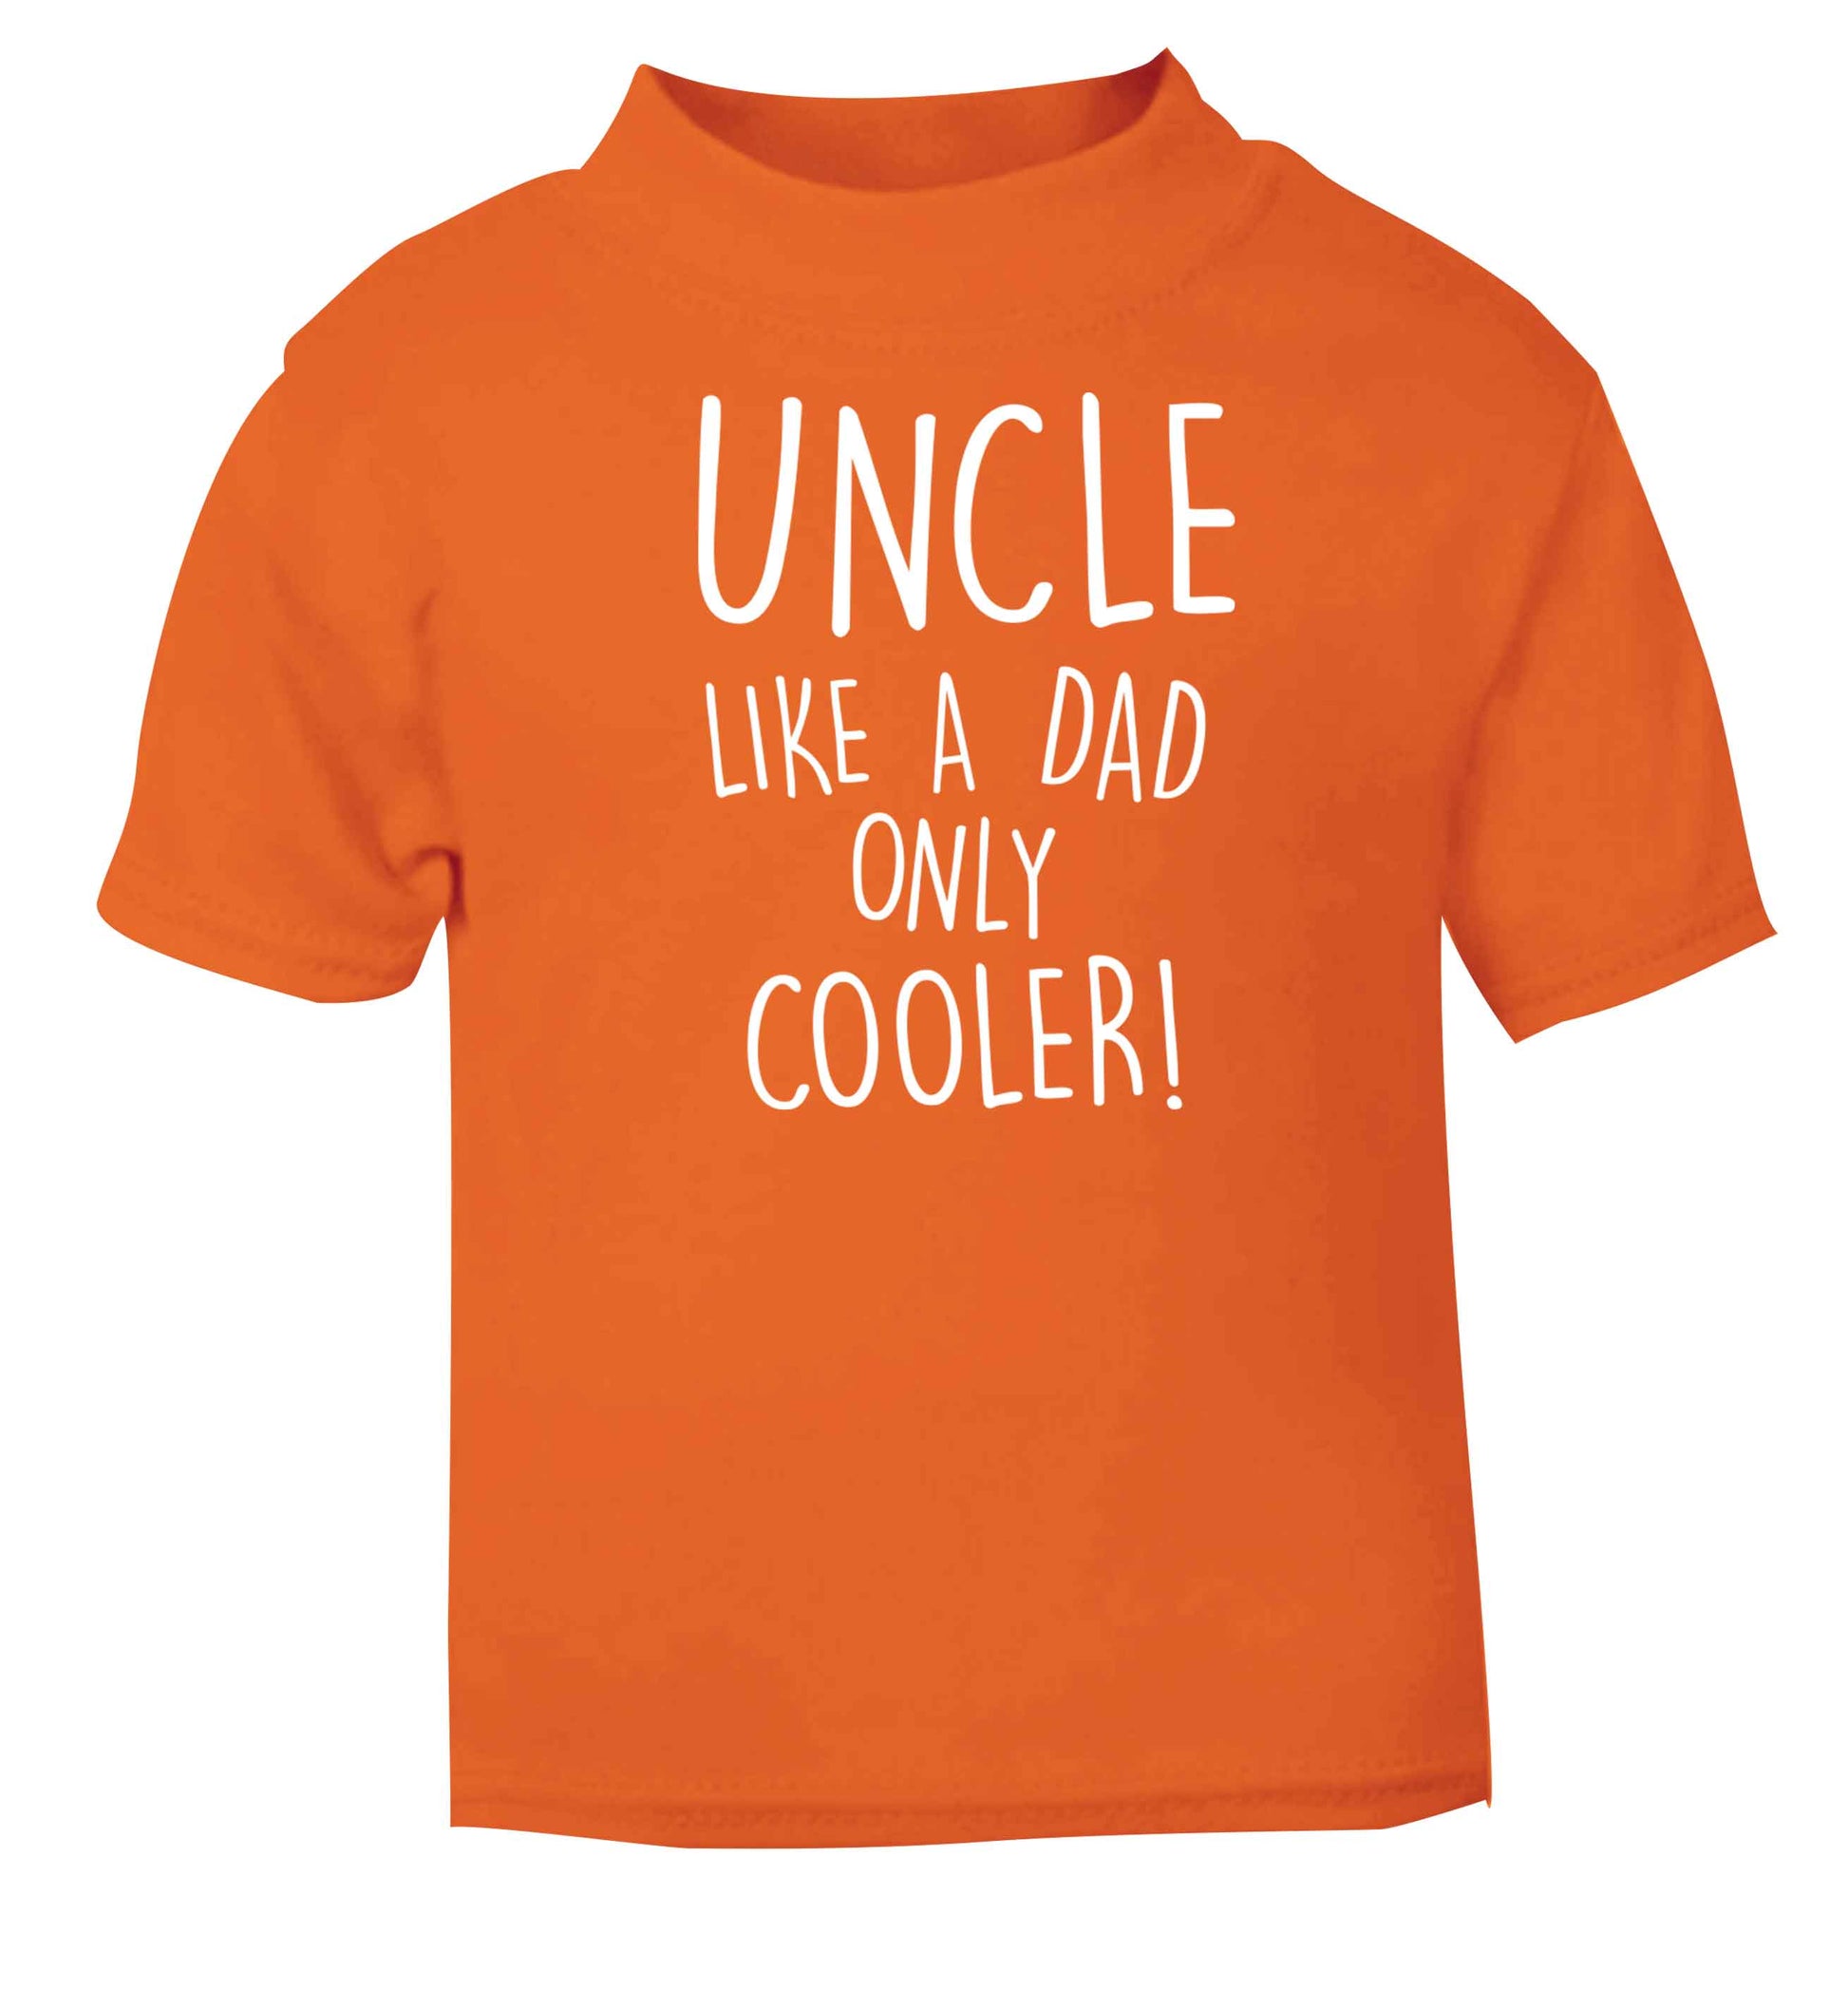 Uncle like a dad only cooler orange baby toddler Tshirt 2 Years